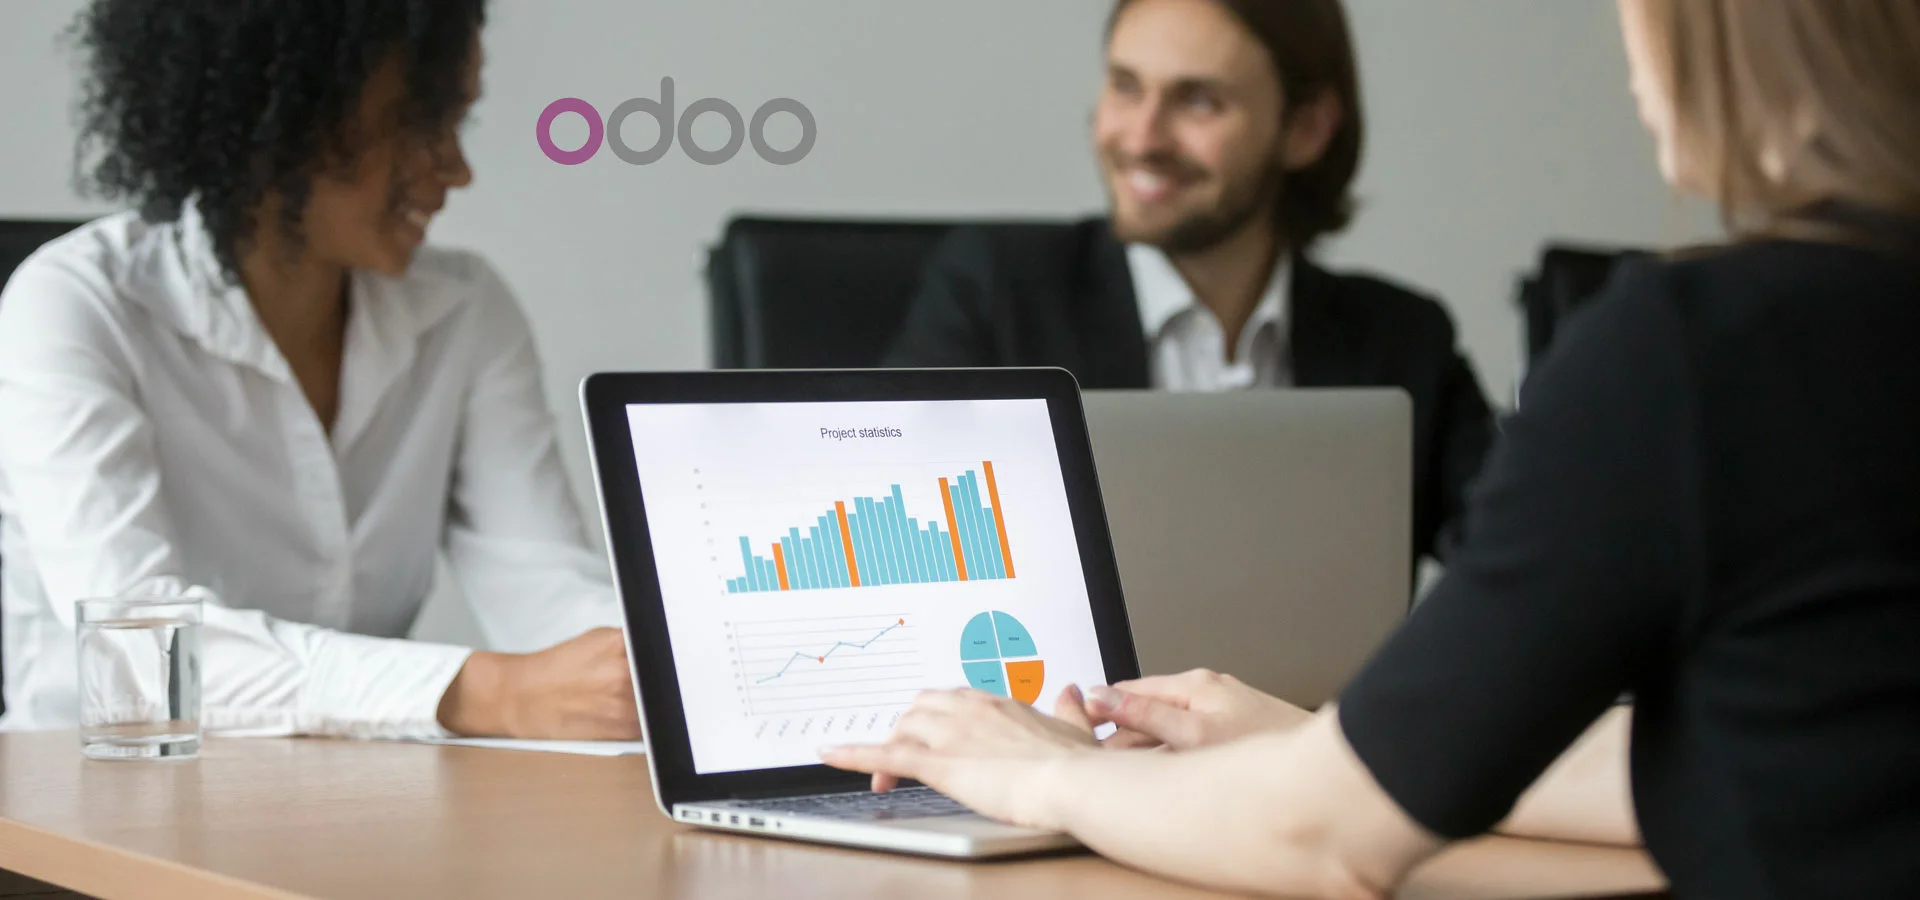 odoo-erp-support-and-services-related-blog-72